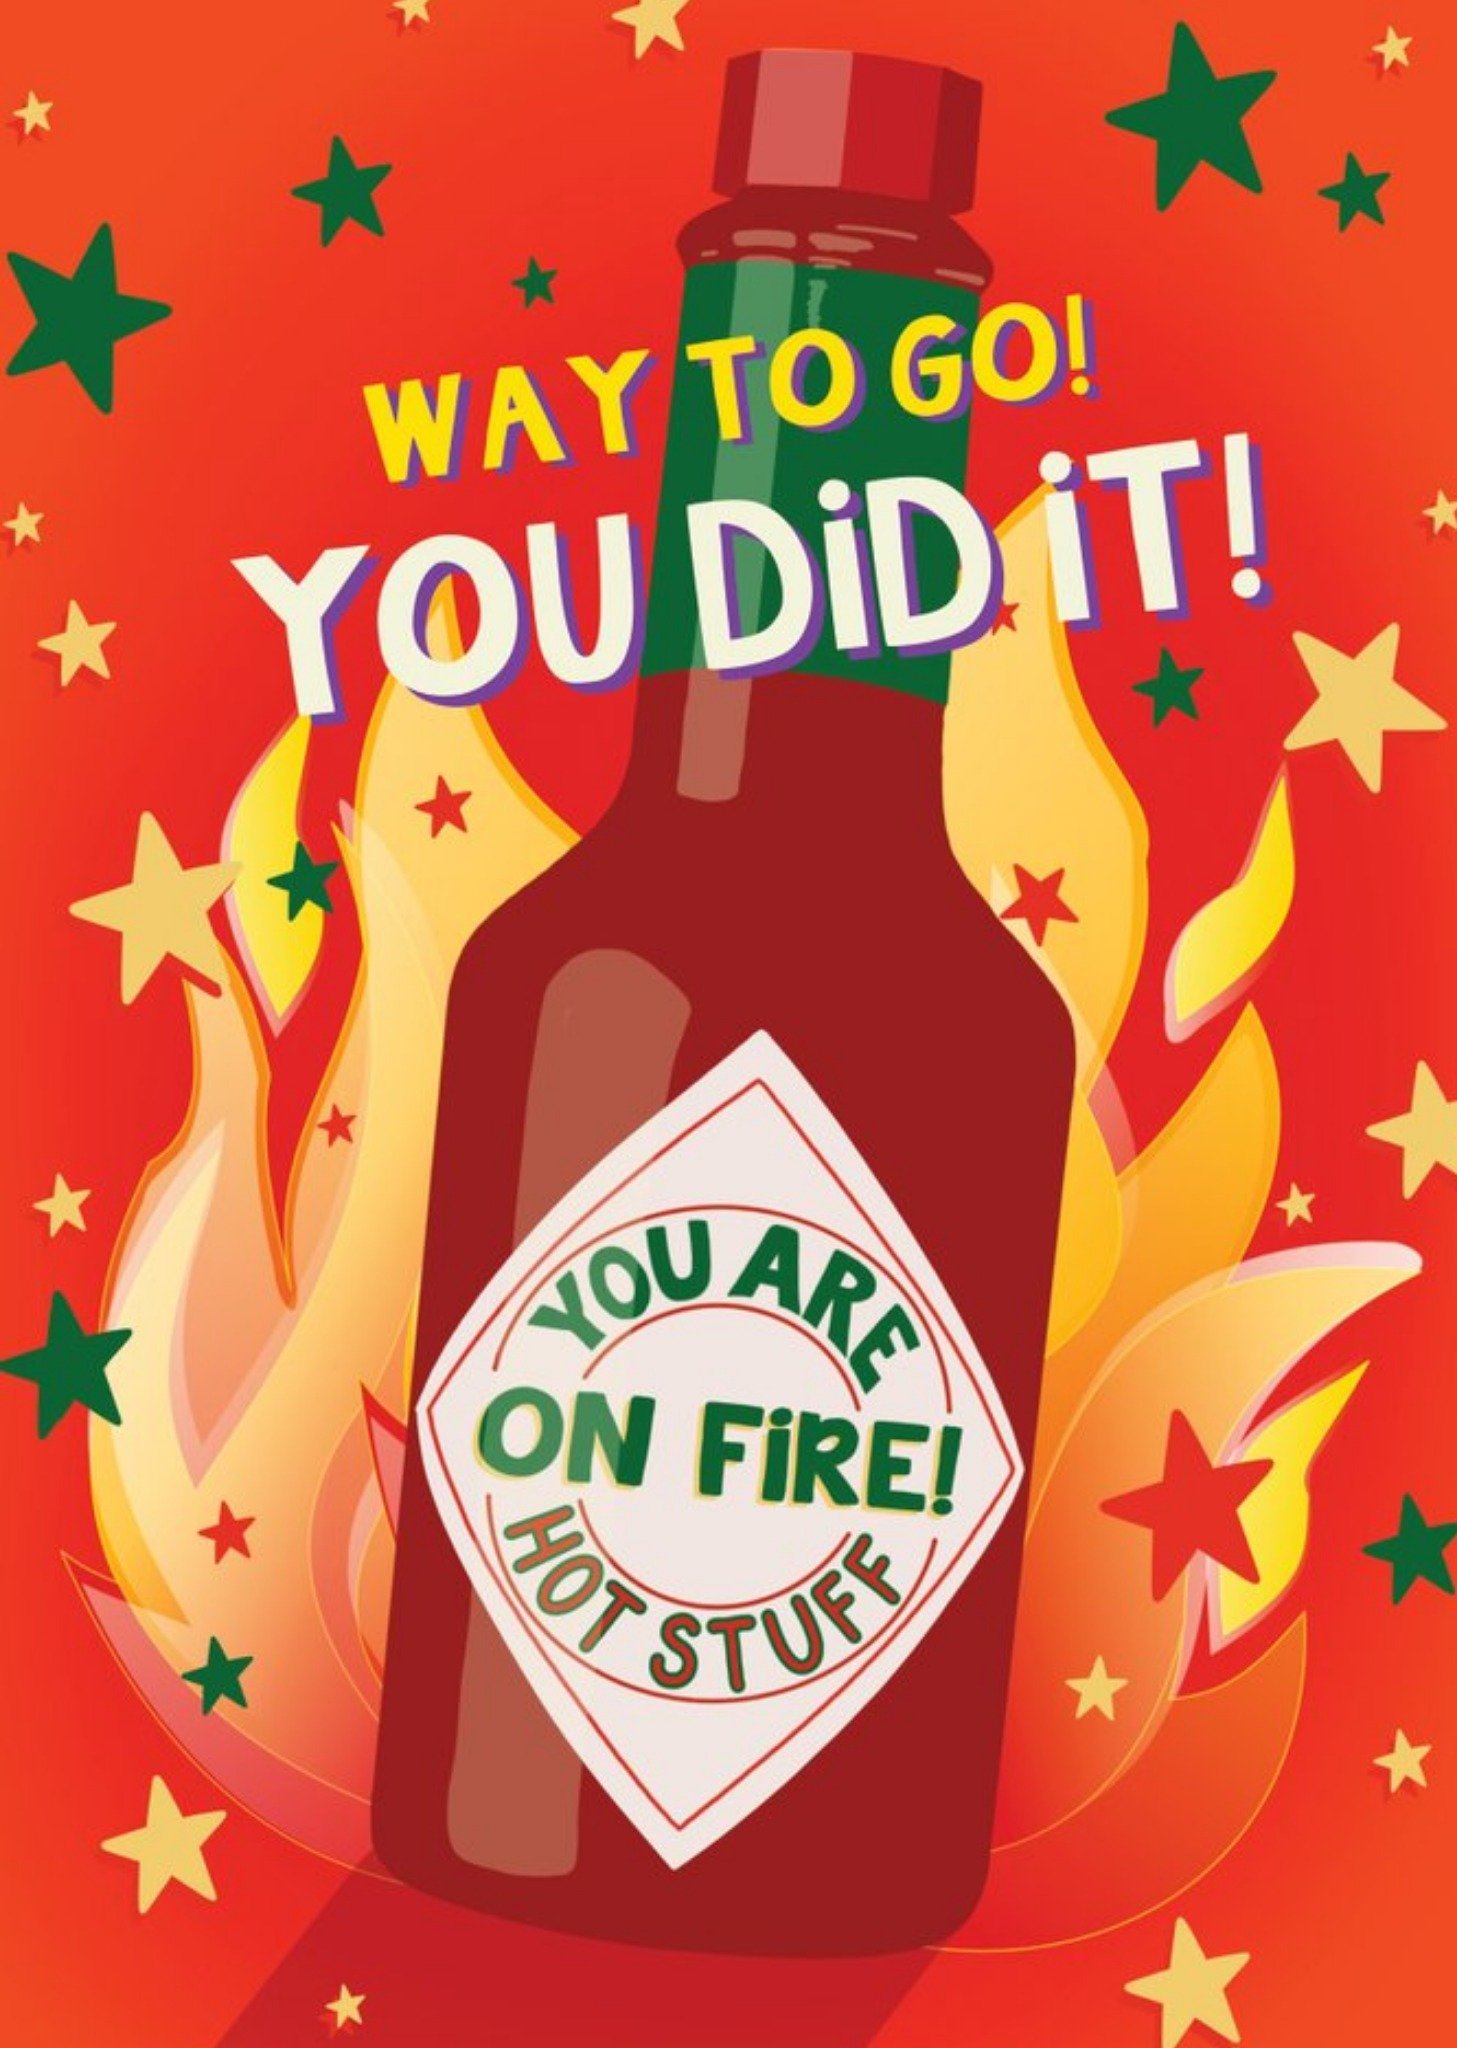 Moonpig Illustration Of A Bottle Of Hot Sauce Surrounded By Flames And Stars New Job Card, Large